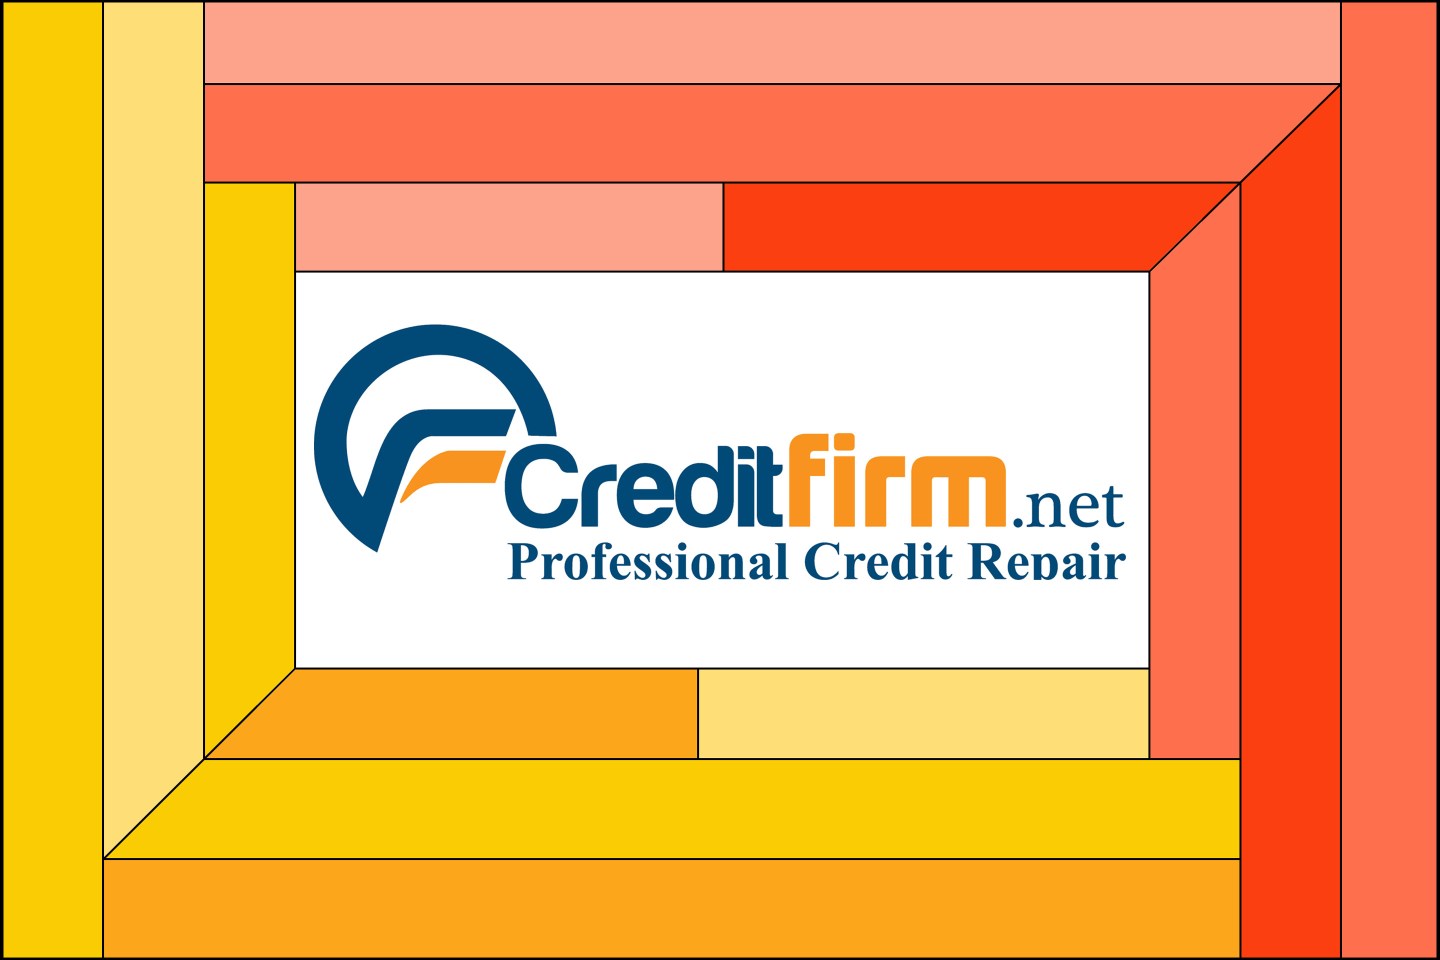 Illustration of the Credit Firm logo inside a yellow and red frame.